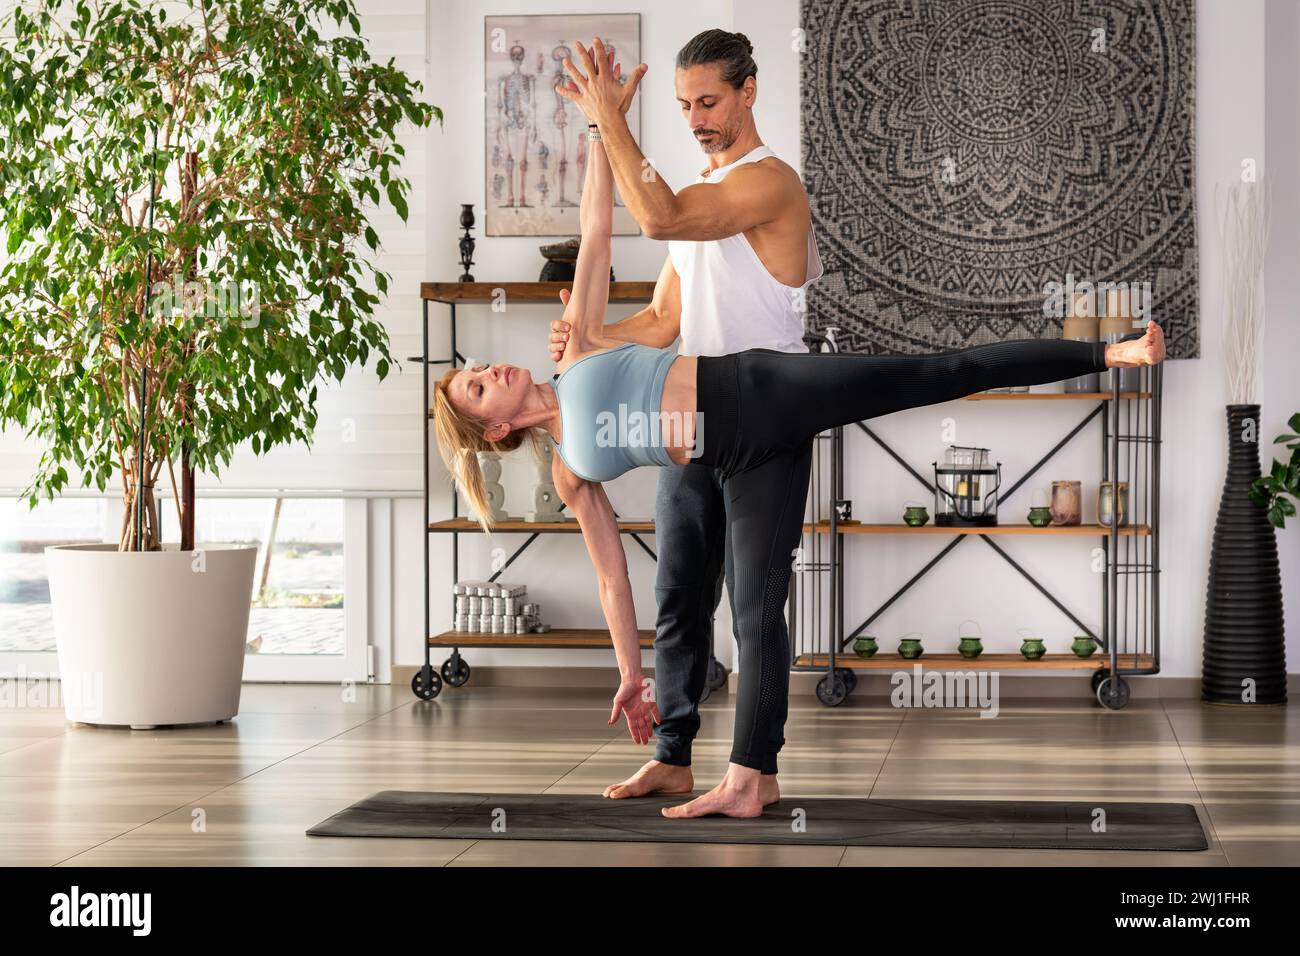 Full body of yoga teacher holding hand of woman while assisting her with Ardha Chandrasana indoors during training against potted green plant shelves Stock Photo